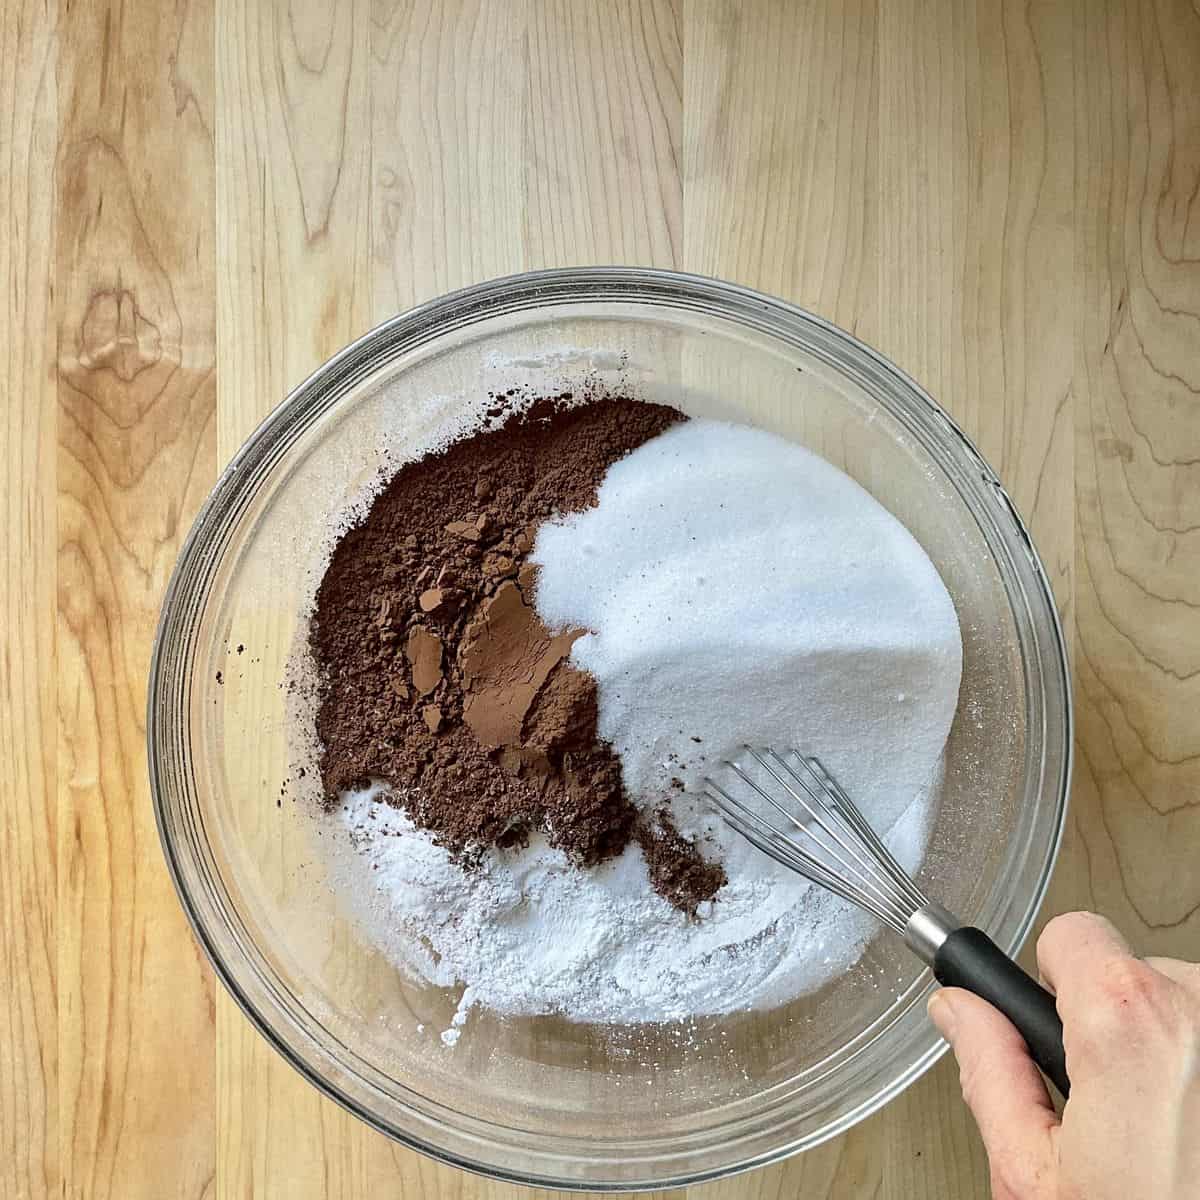 The dry ingredients to make chocolate cake in a mixing bowl.